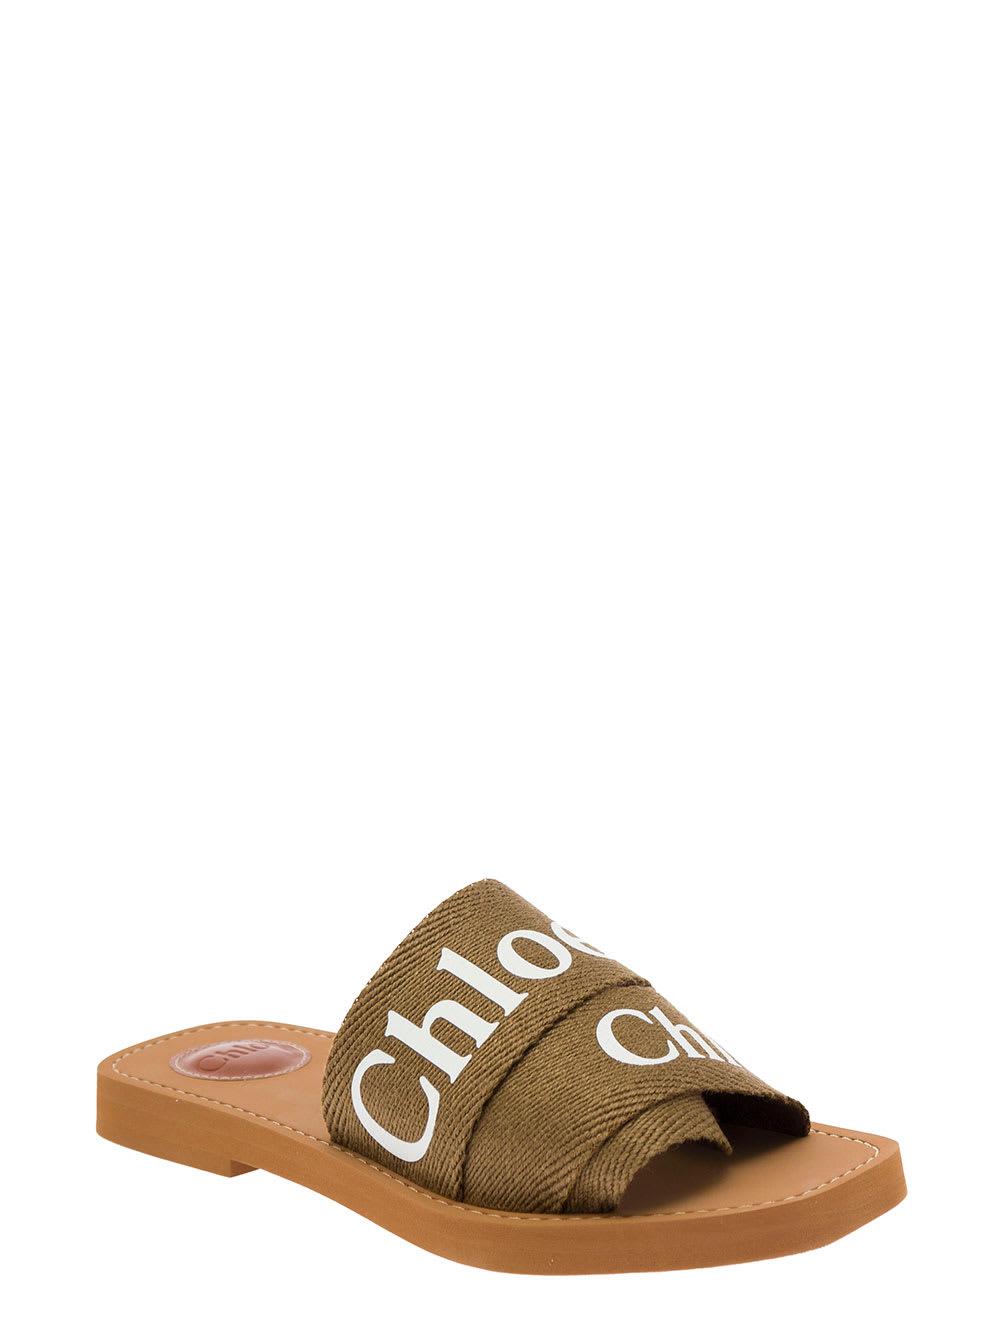 Women's Gold and Canvas Slides